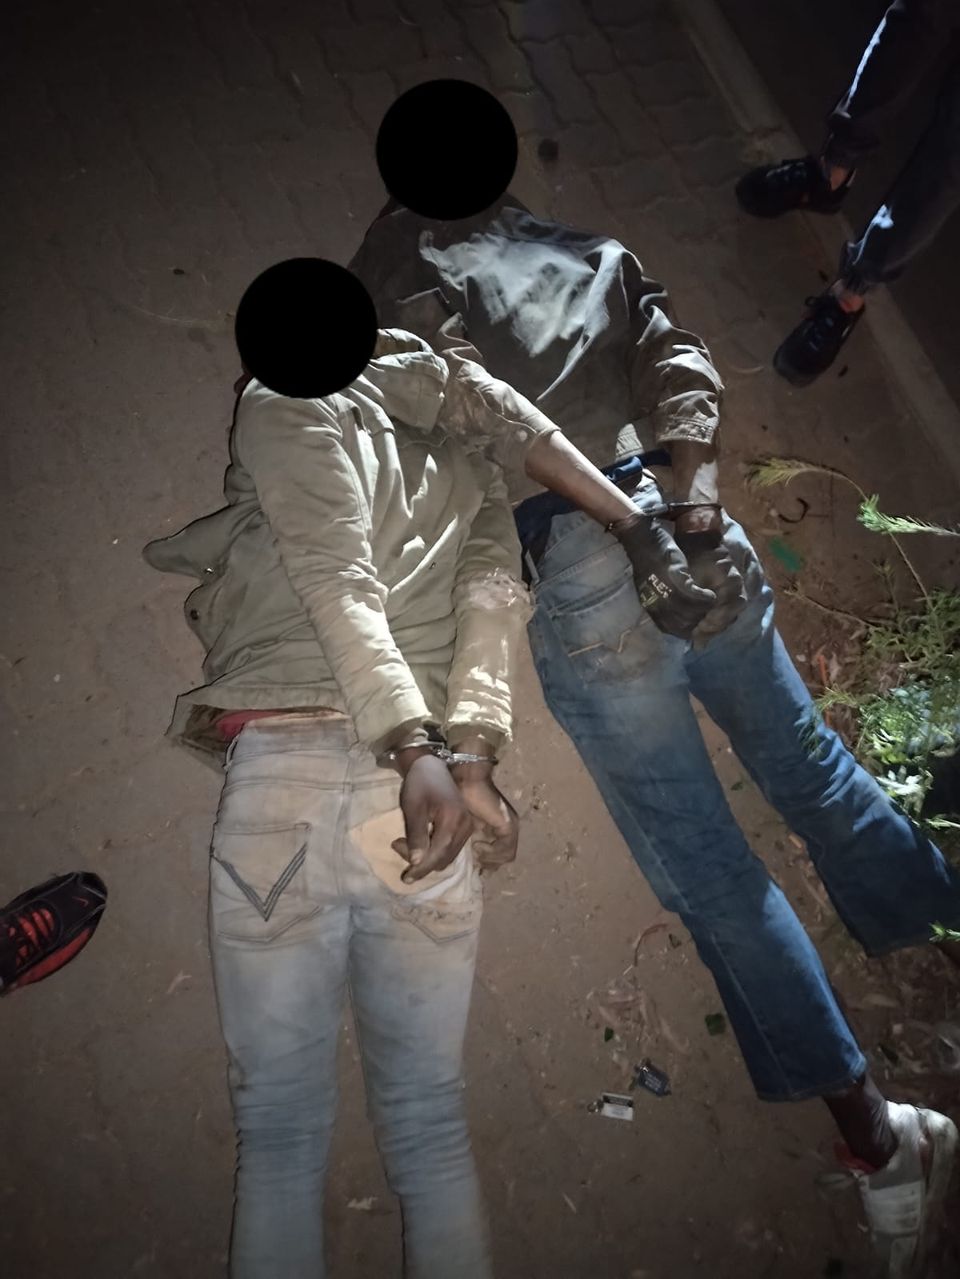 Suspects arrested for cable theft in the Turffontein area in Johannesburg South